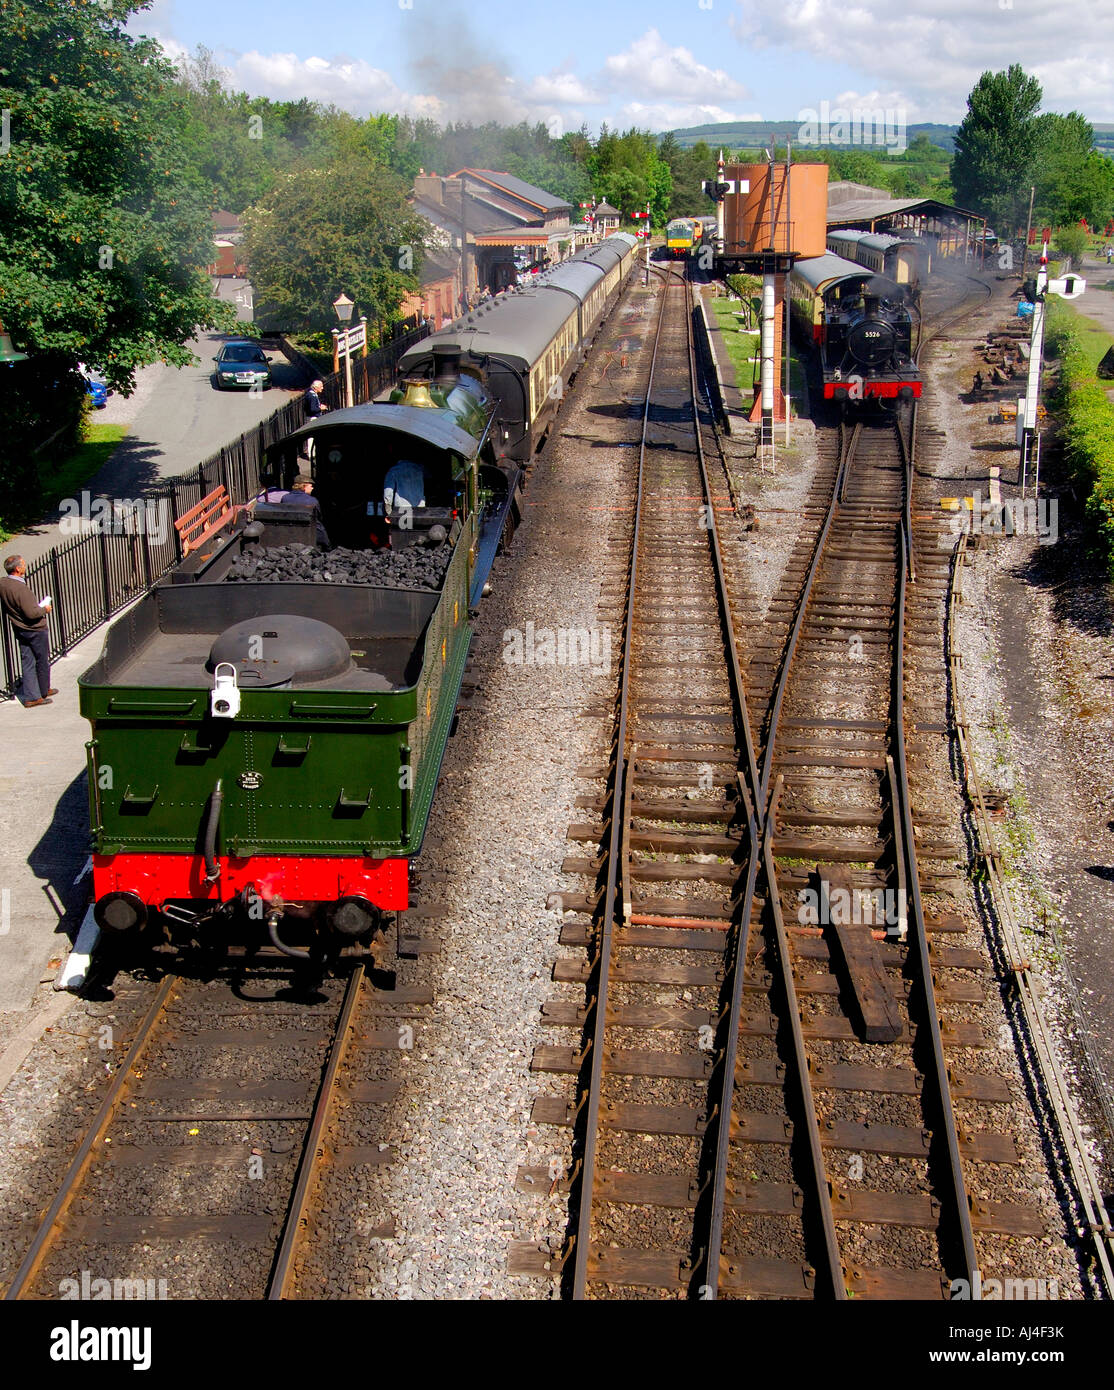 Two steam trains on the track at Buckfastleigh station on the South Devon Railway with clear blue sky Stock Photo